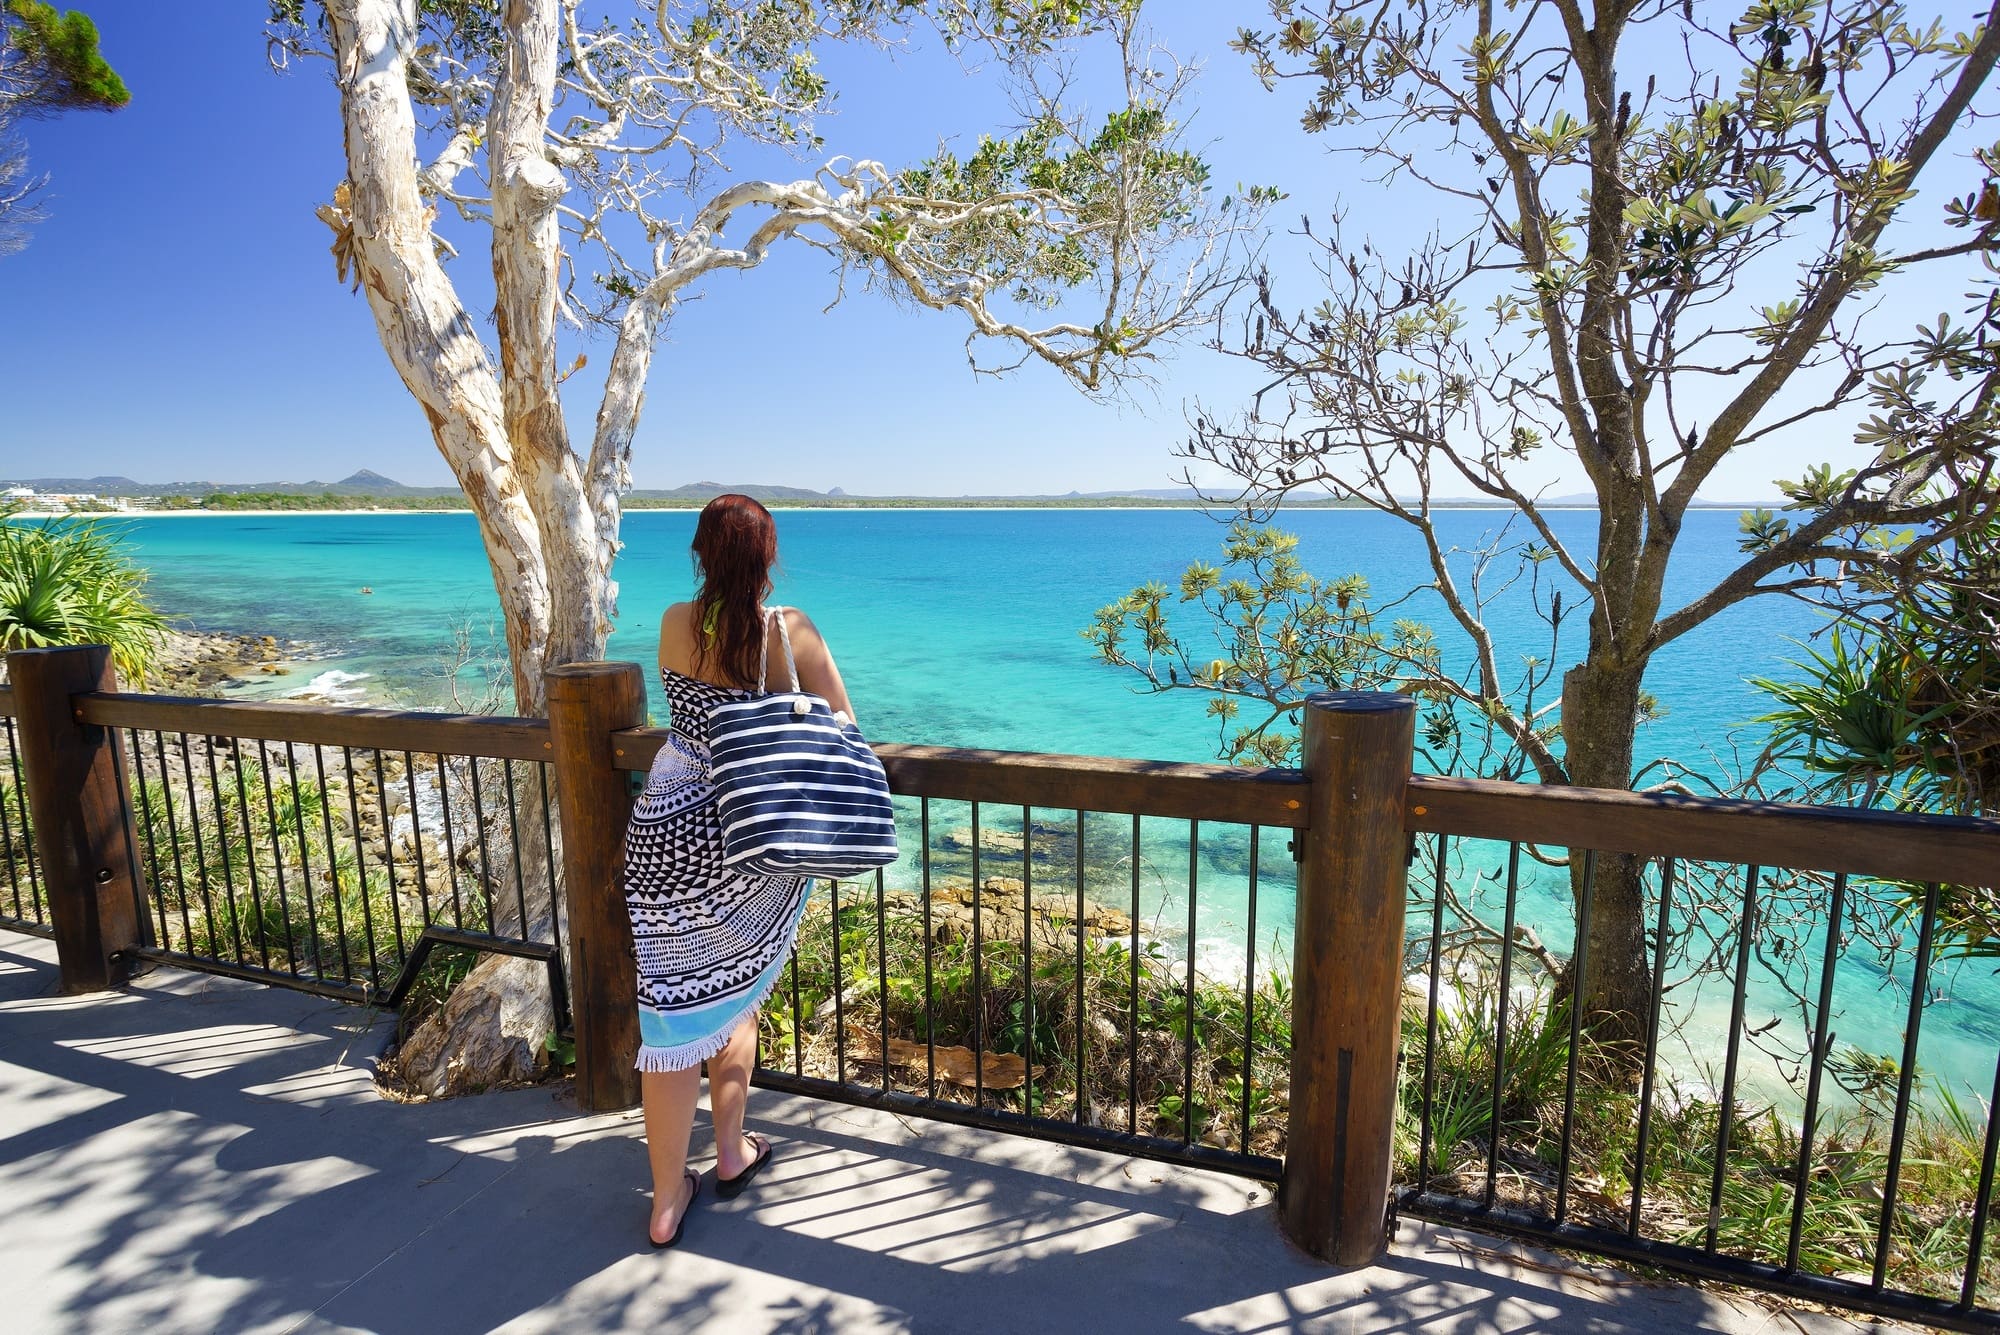 A local's guide to Noosa